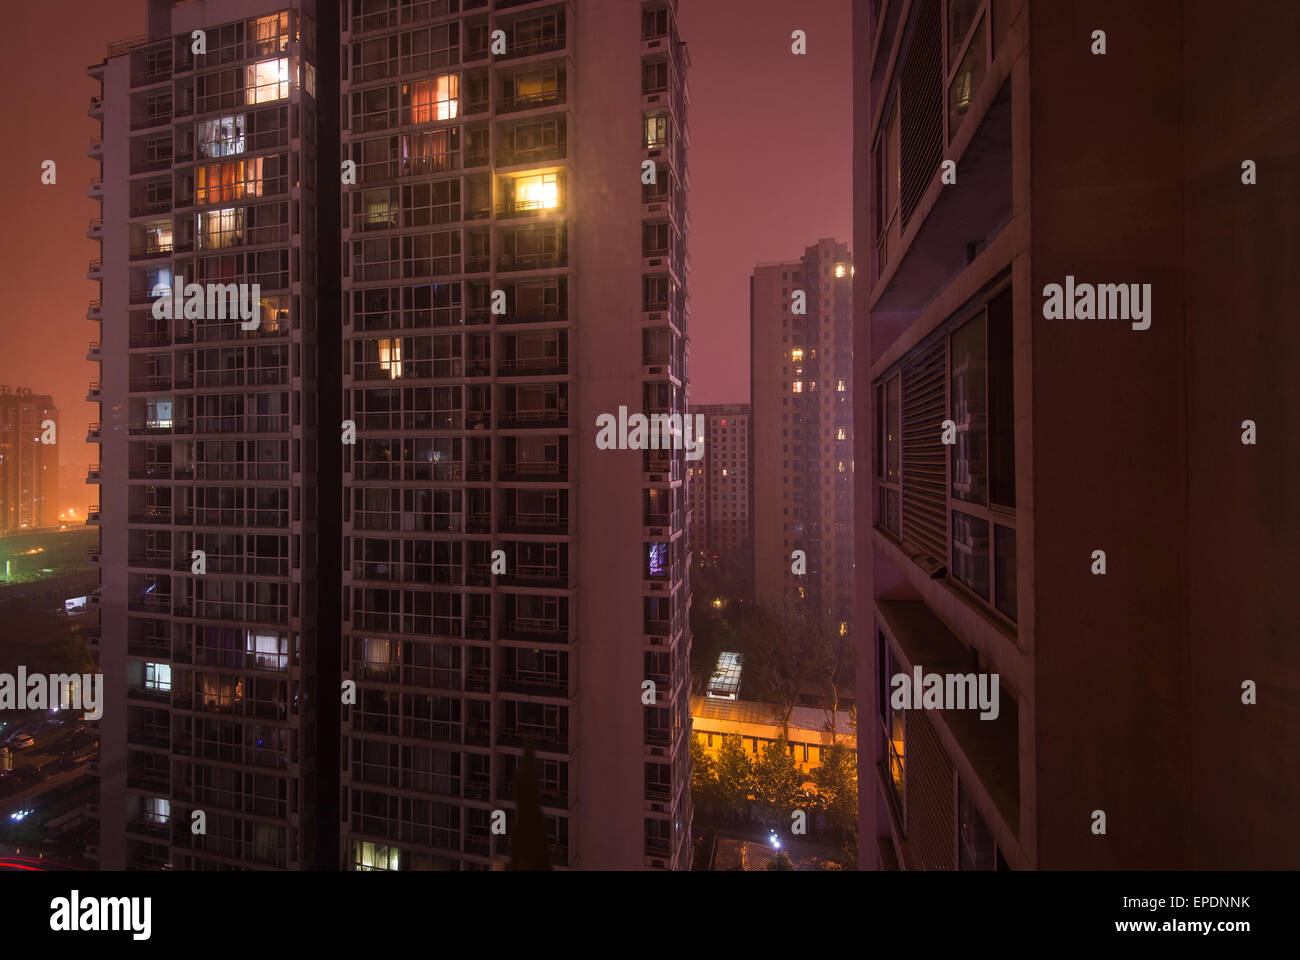 Apartment buildings in Beijing China at night Stock Photo